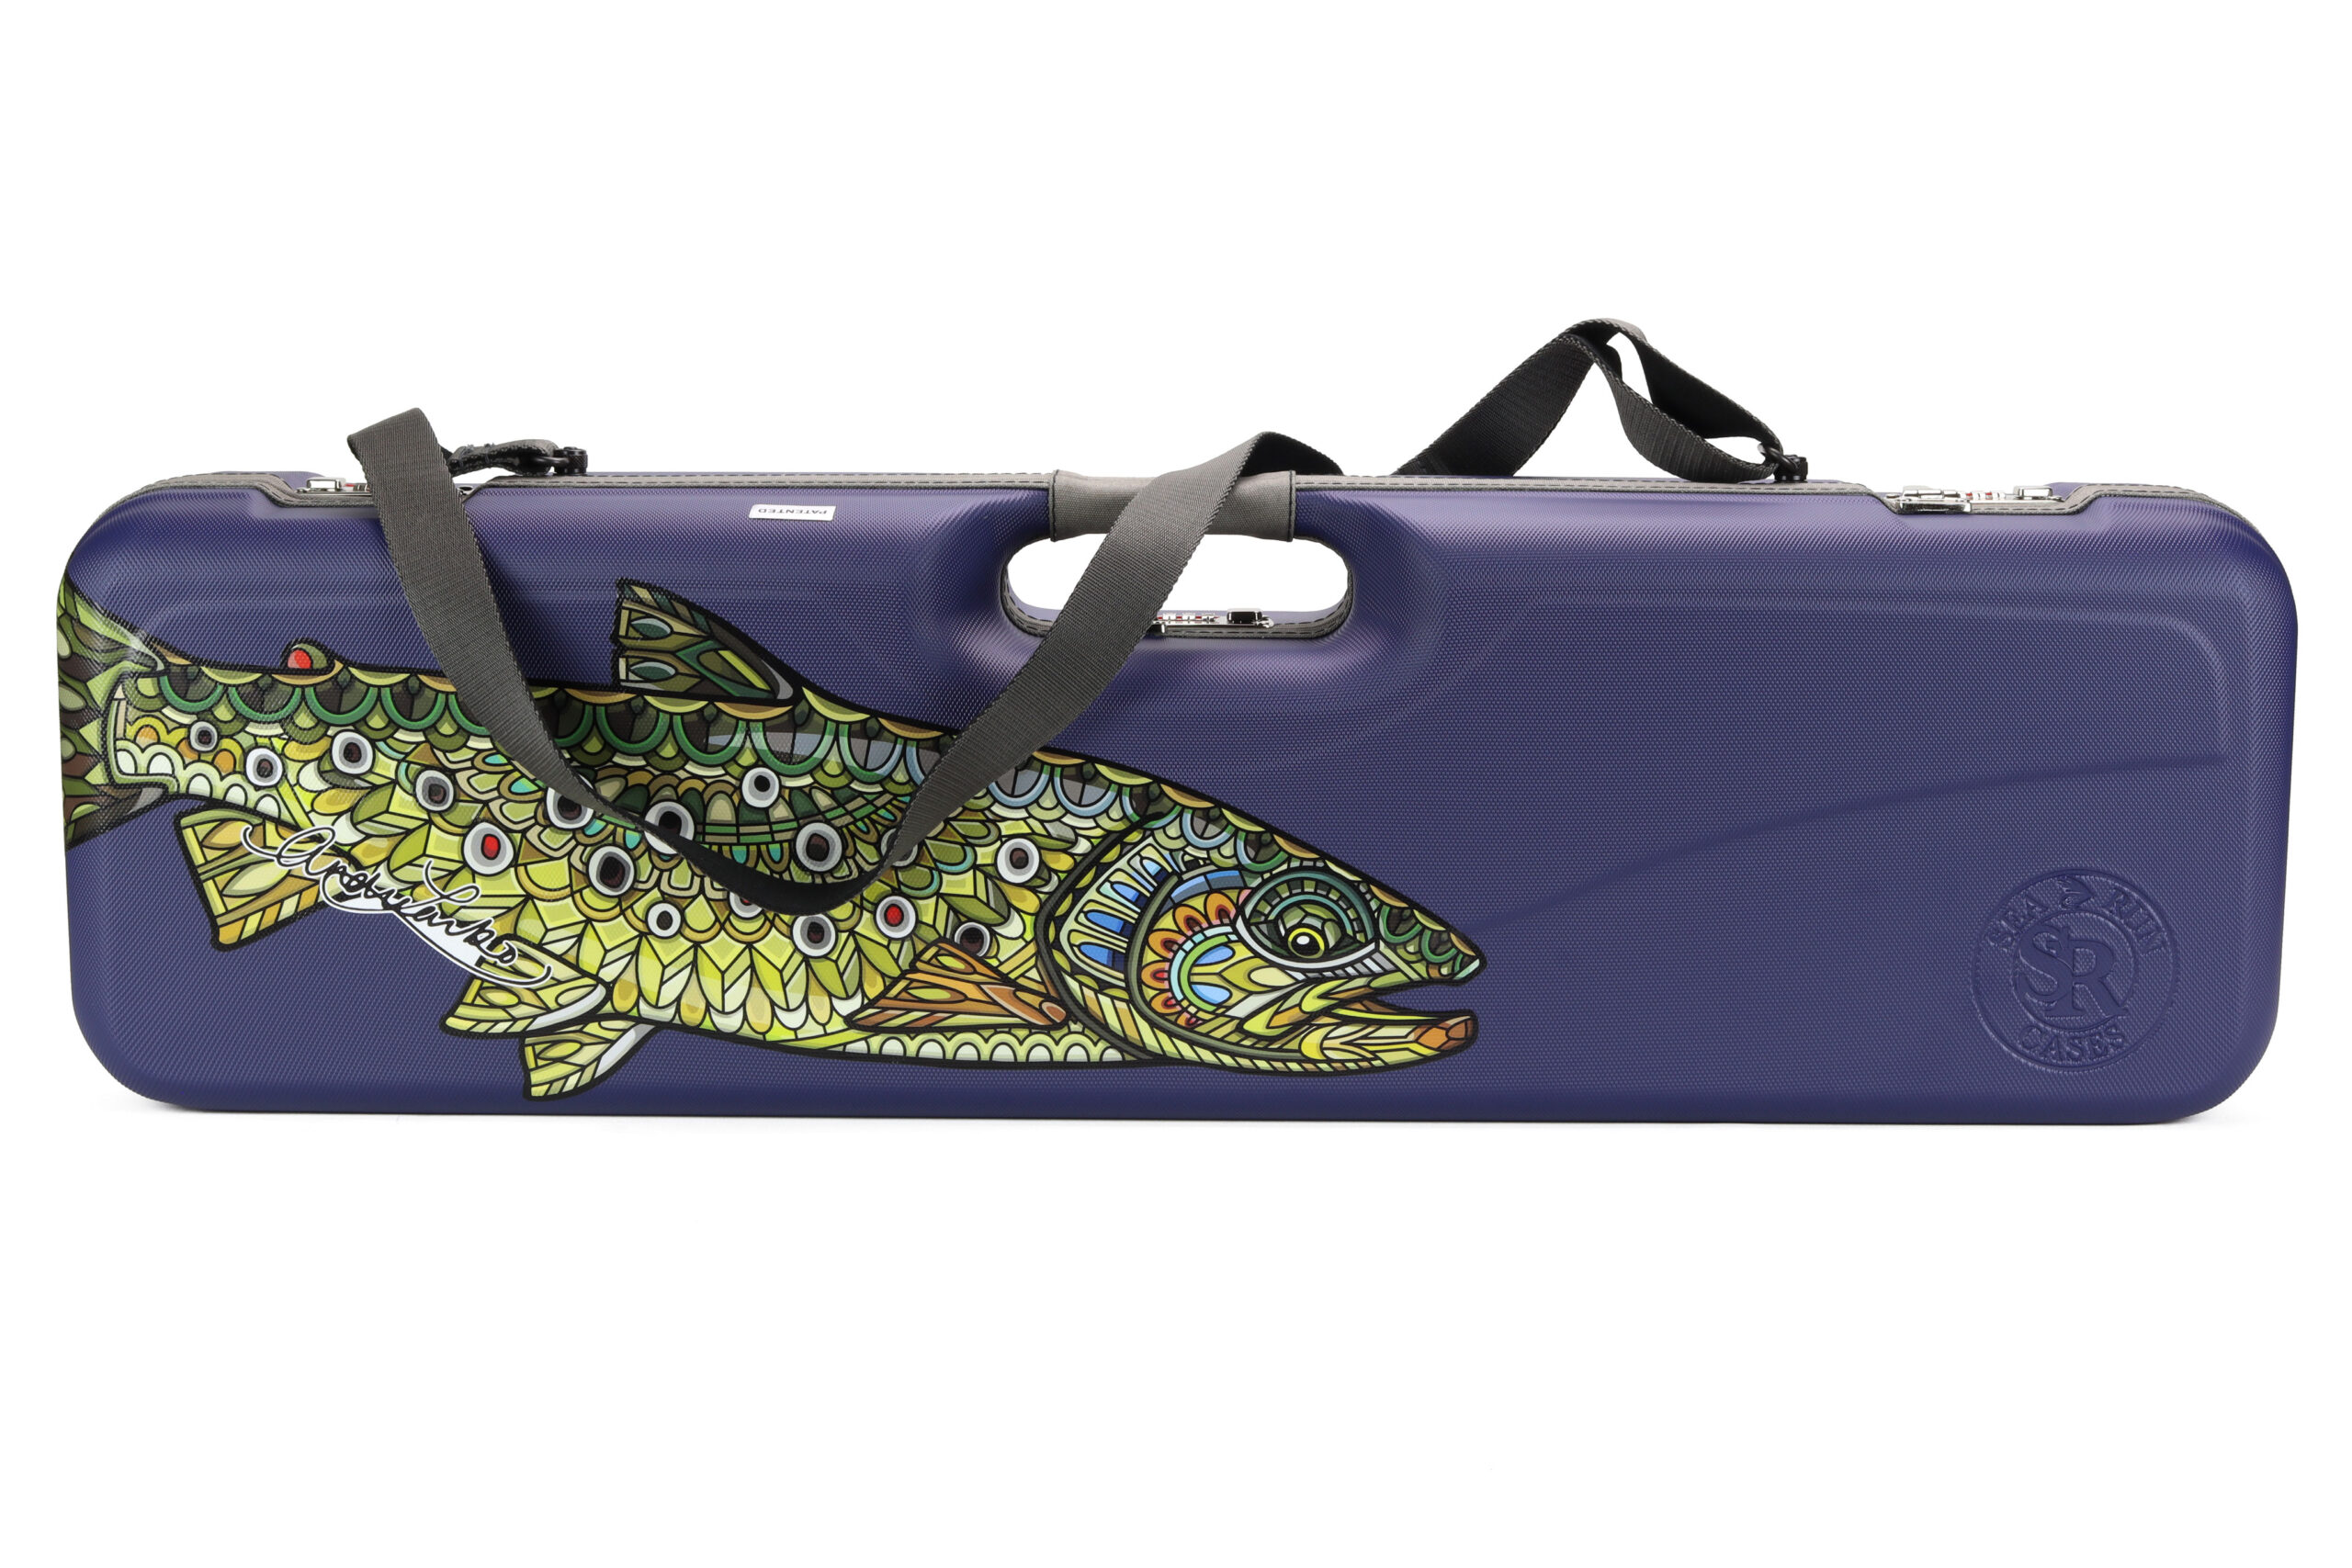 Sea Run Norfork QR ExpeditionFly Fishing Rod Travel Case 16201LX